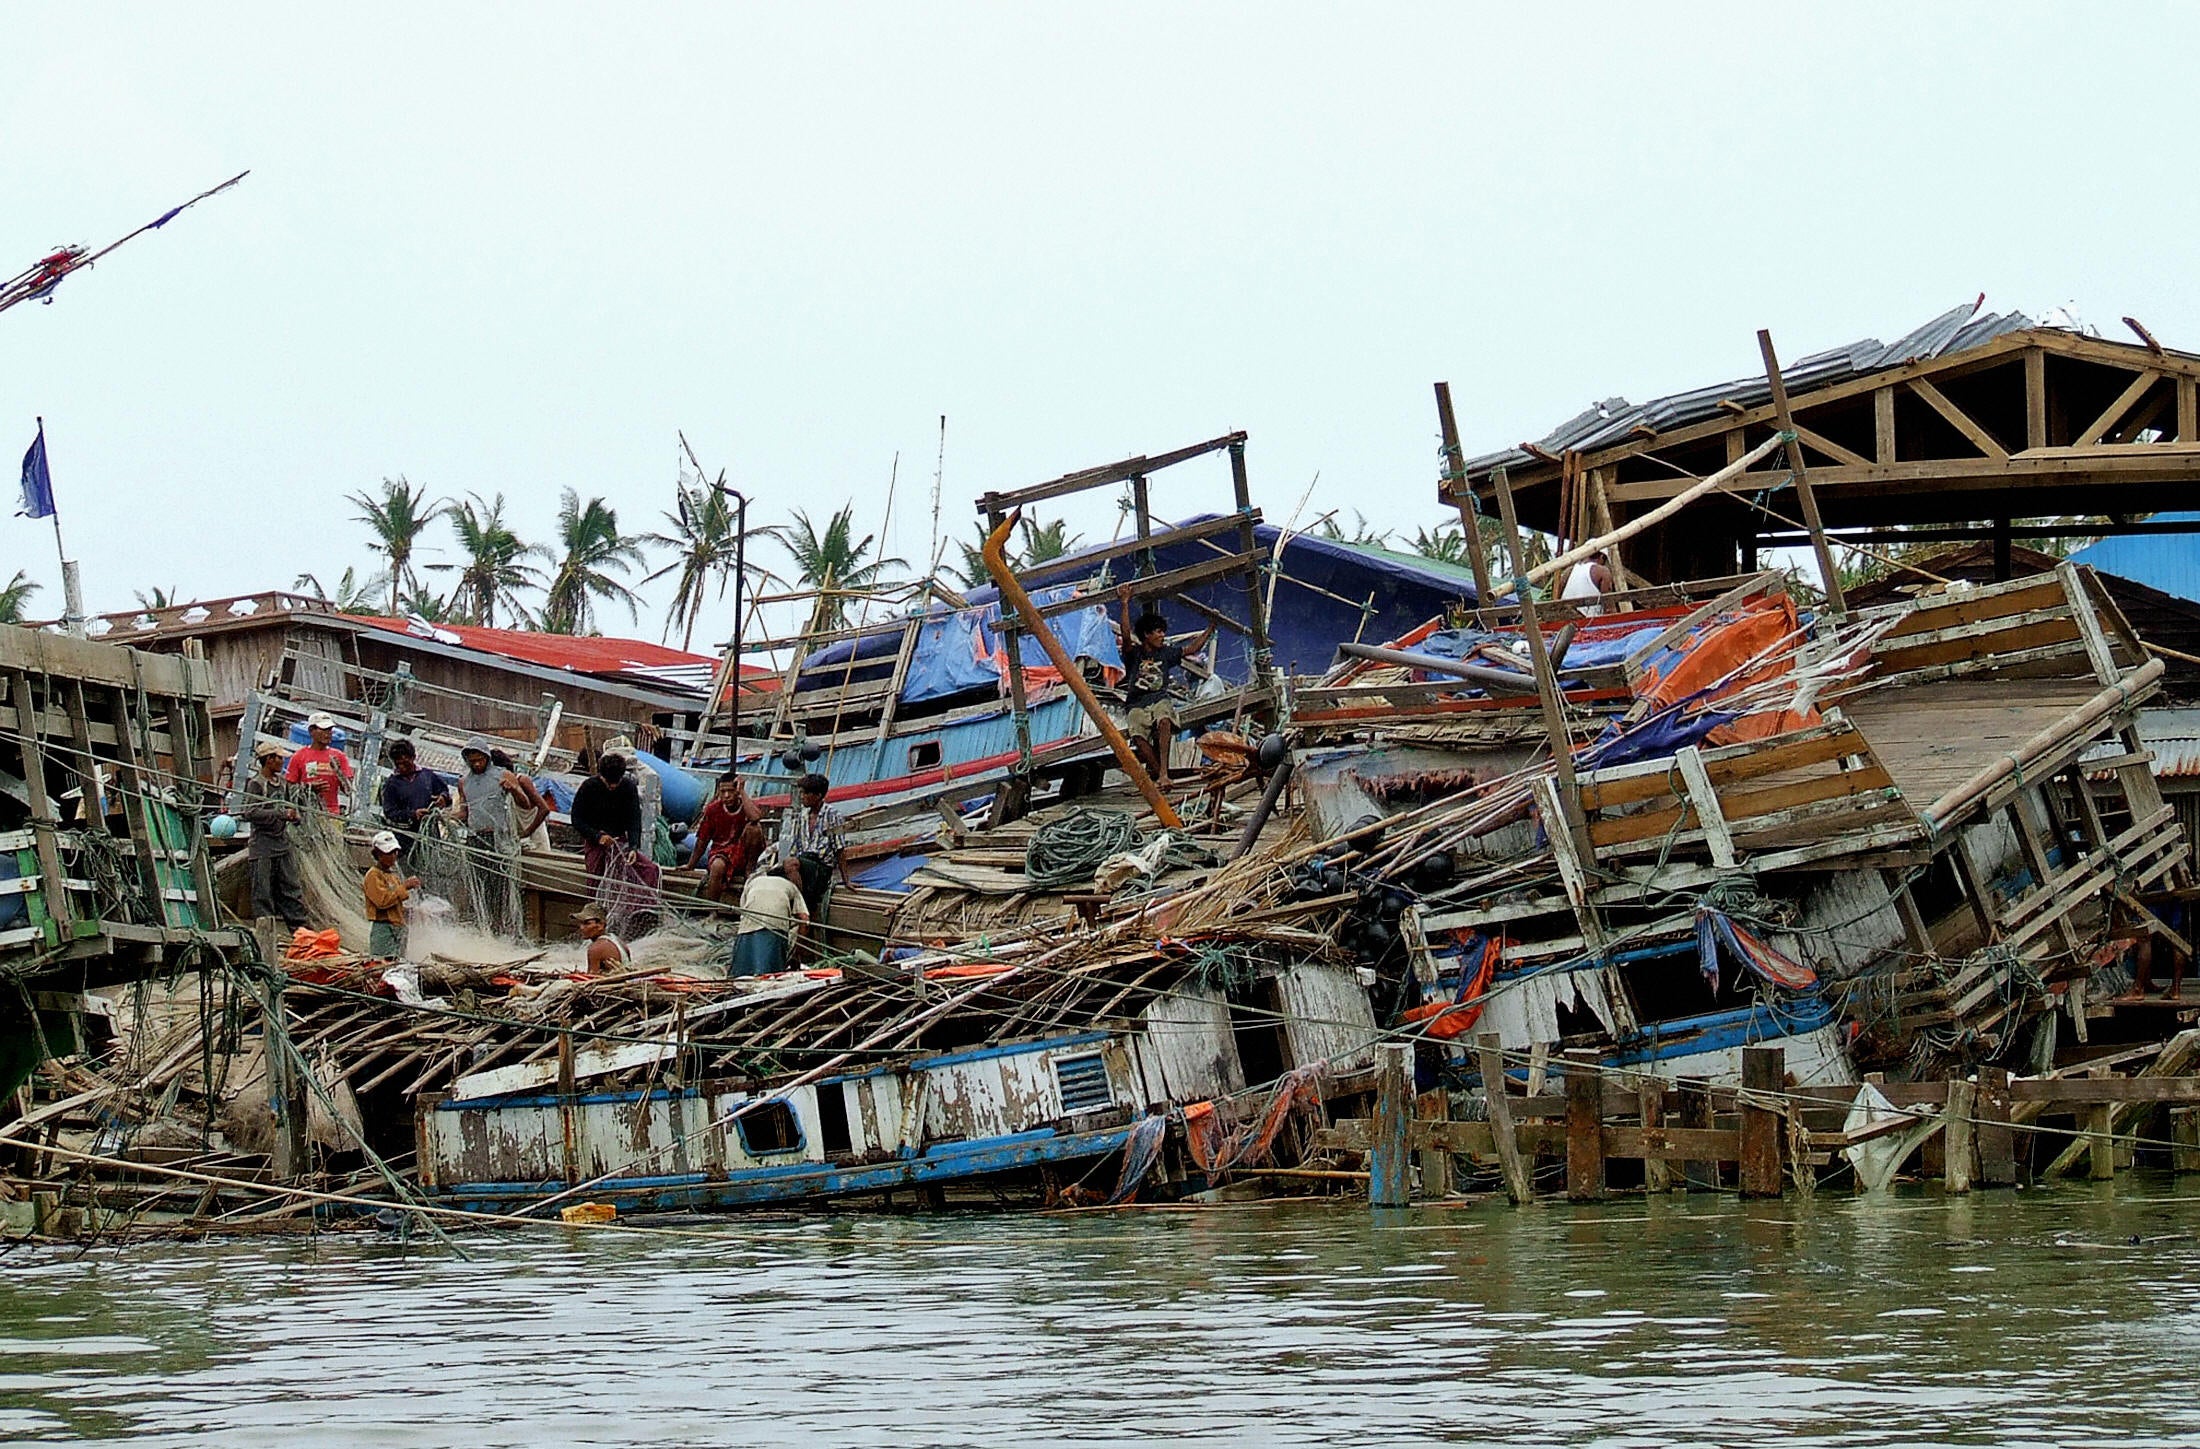 Survivors stand on houses destroyed by Cyclone Nargis in Haing Gyi island in 2008